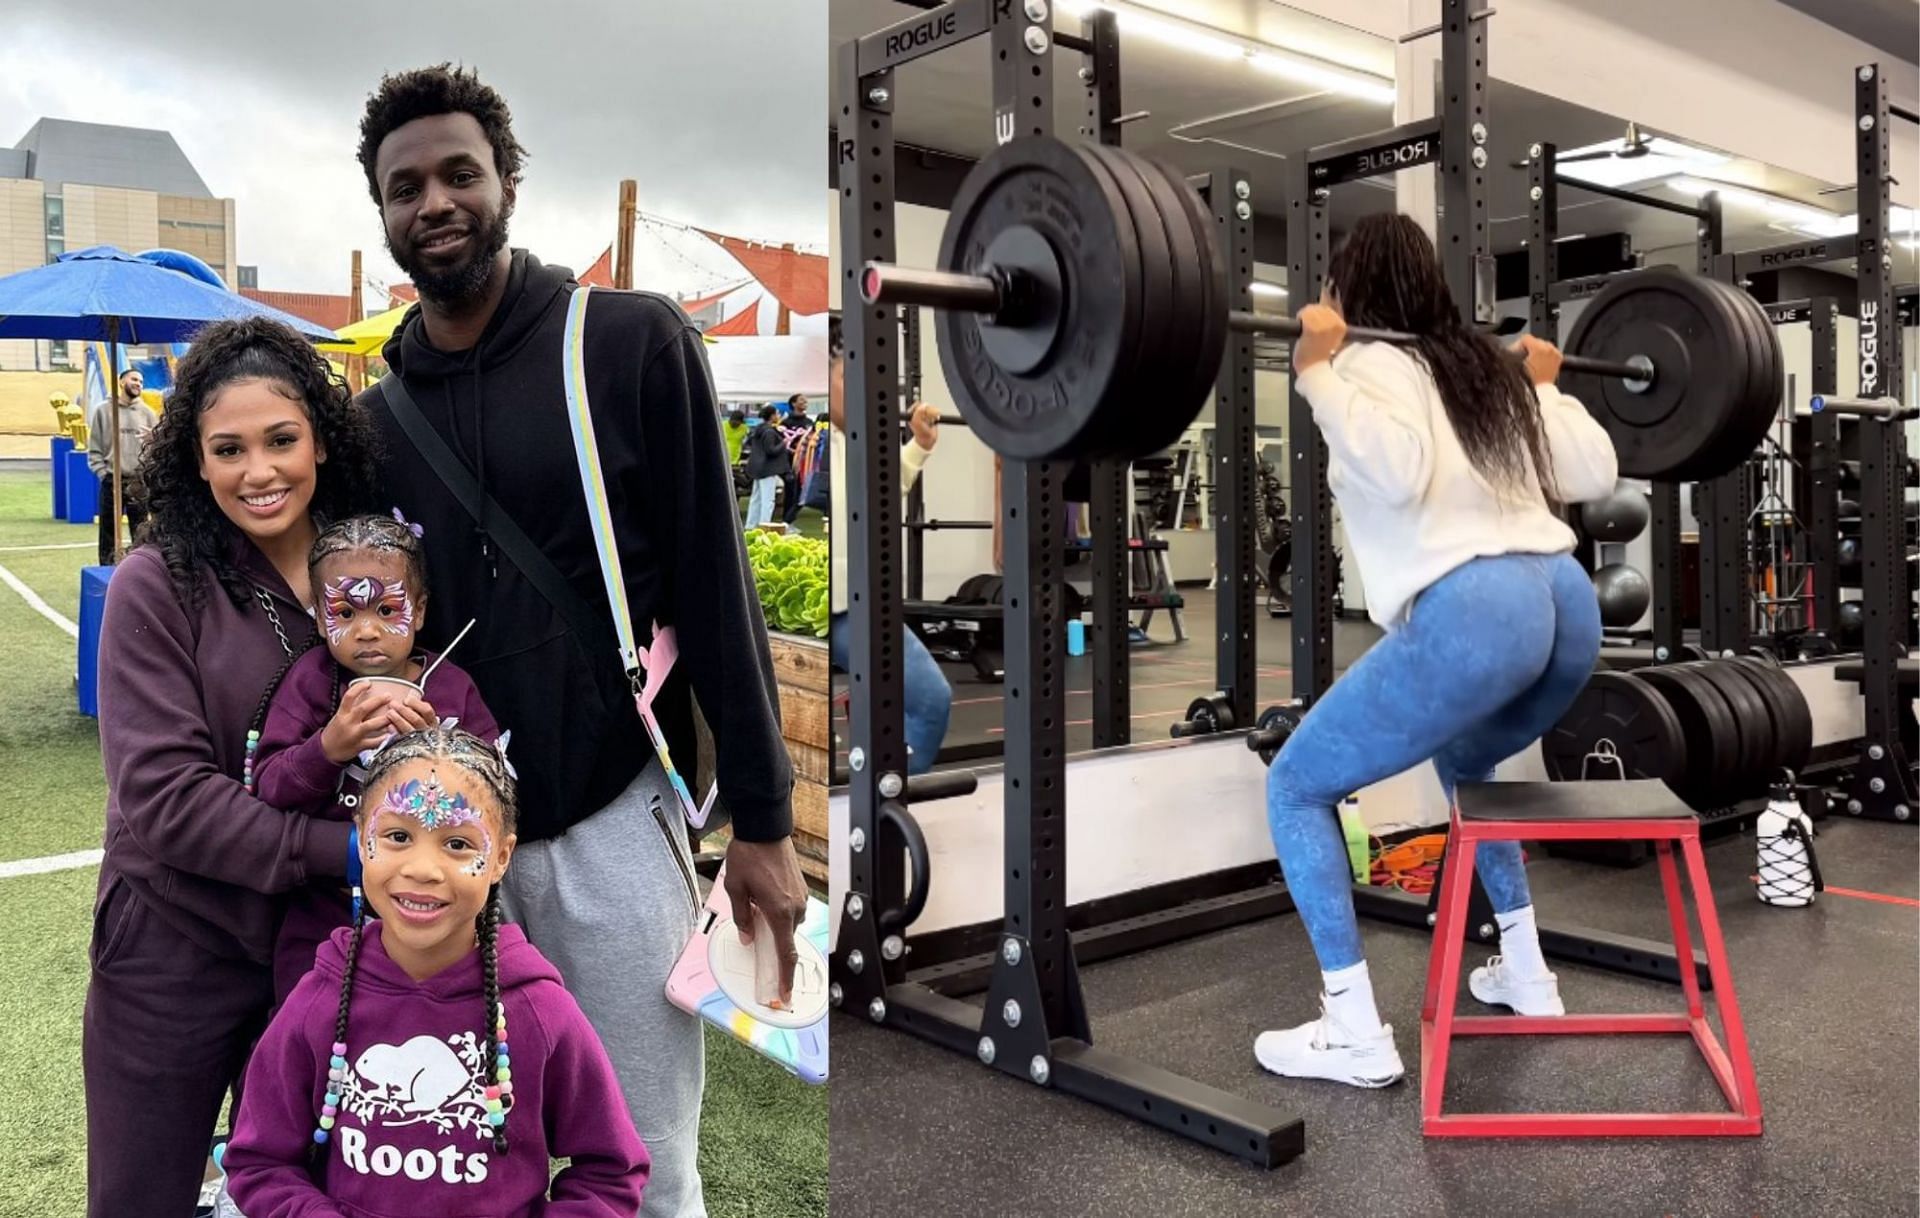 Andrew Wiggins long-time partner, Mychal Johnson, shows her workout routine in her Instagram stories